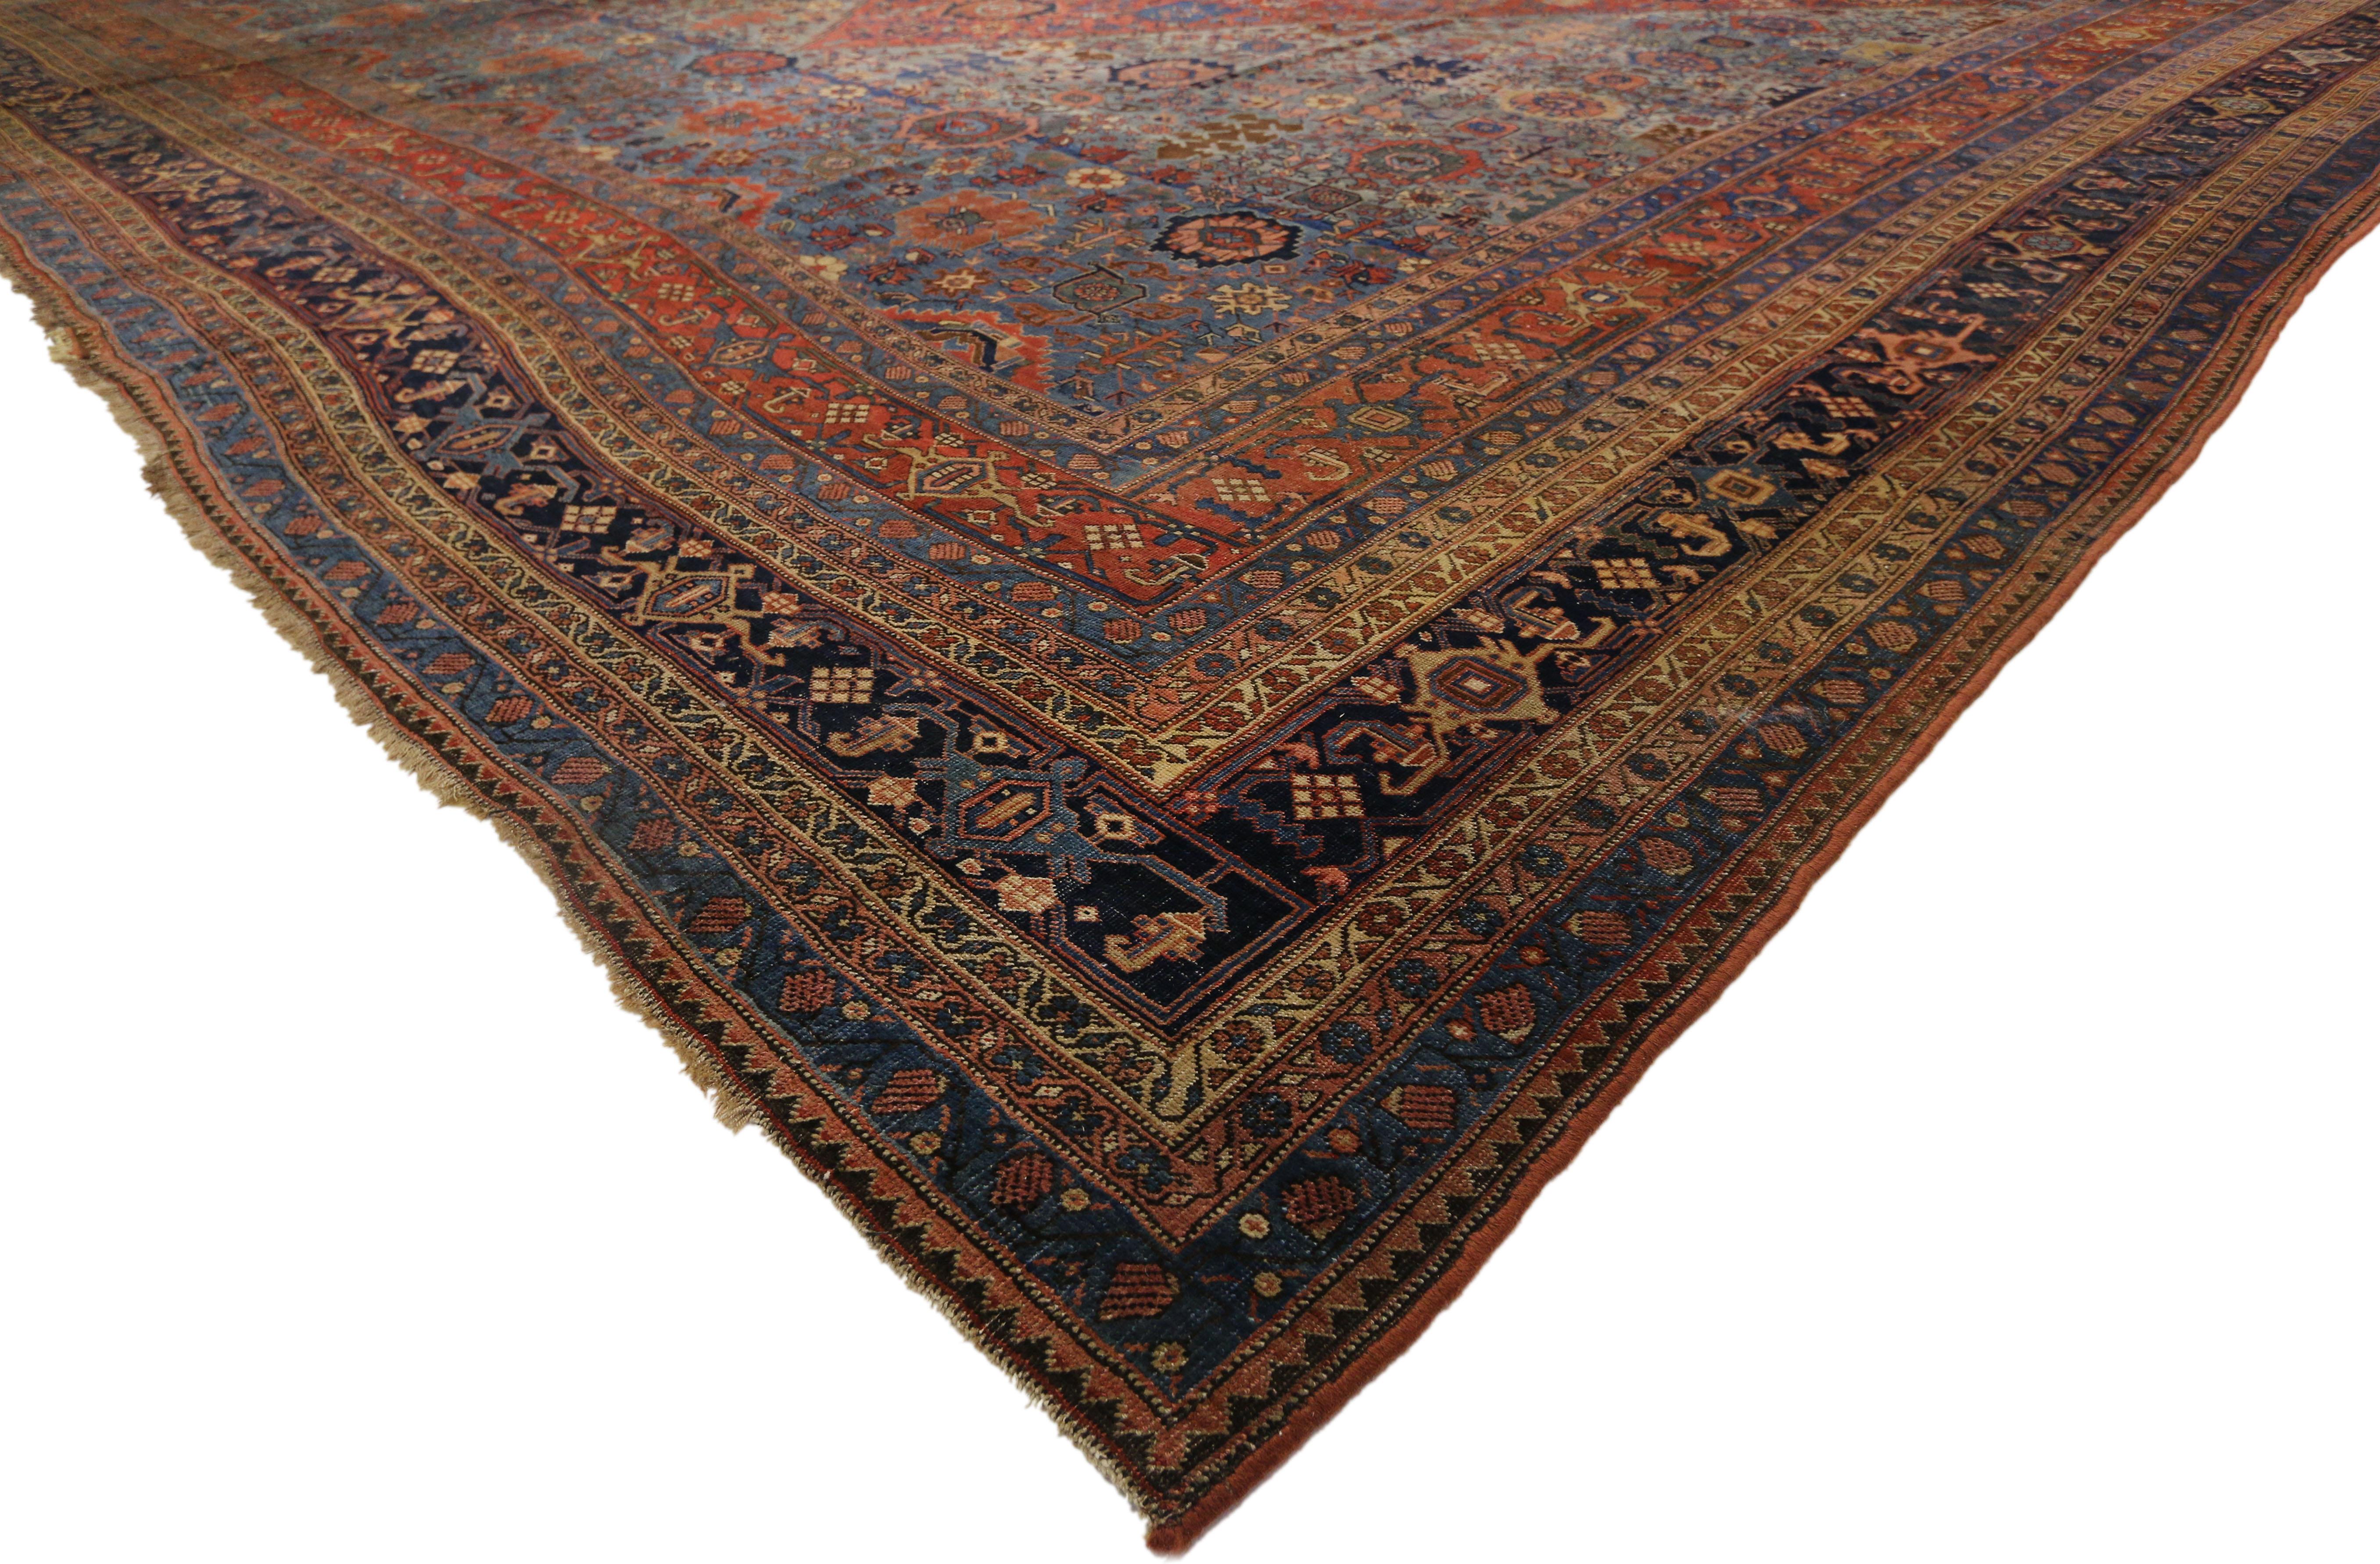 77327 antique Persian Halwai (Halvei) Bijar Palace rug with American Colonial style. With an all-over rectilinear pattern and vibrant color palette, this hand knotted wool antique Persian Halvai Bidjar palace rug beautifully highlights the finer